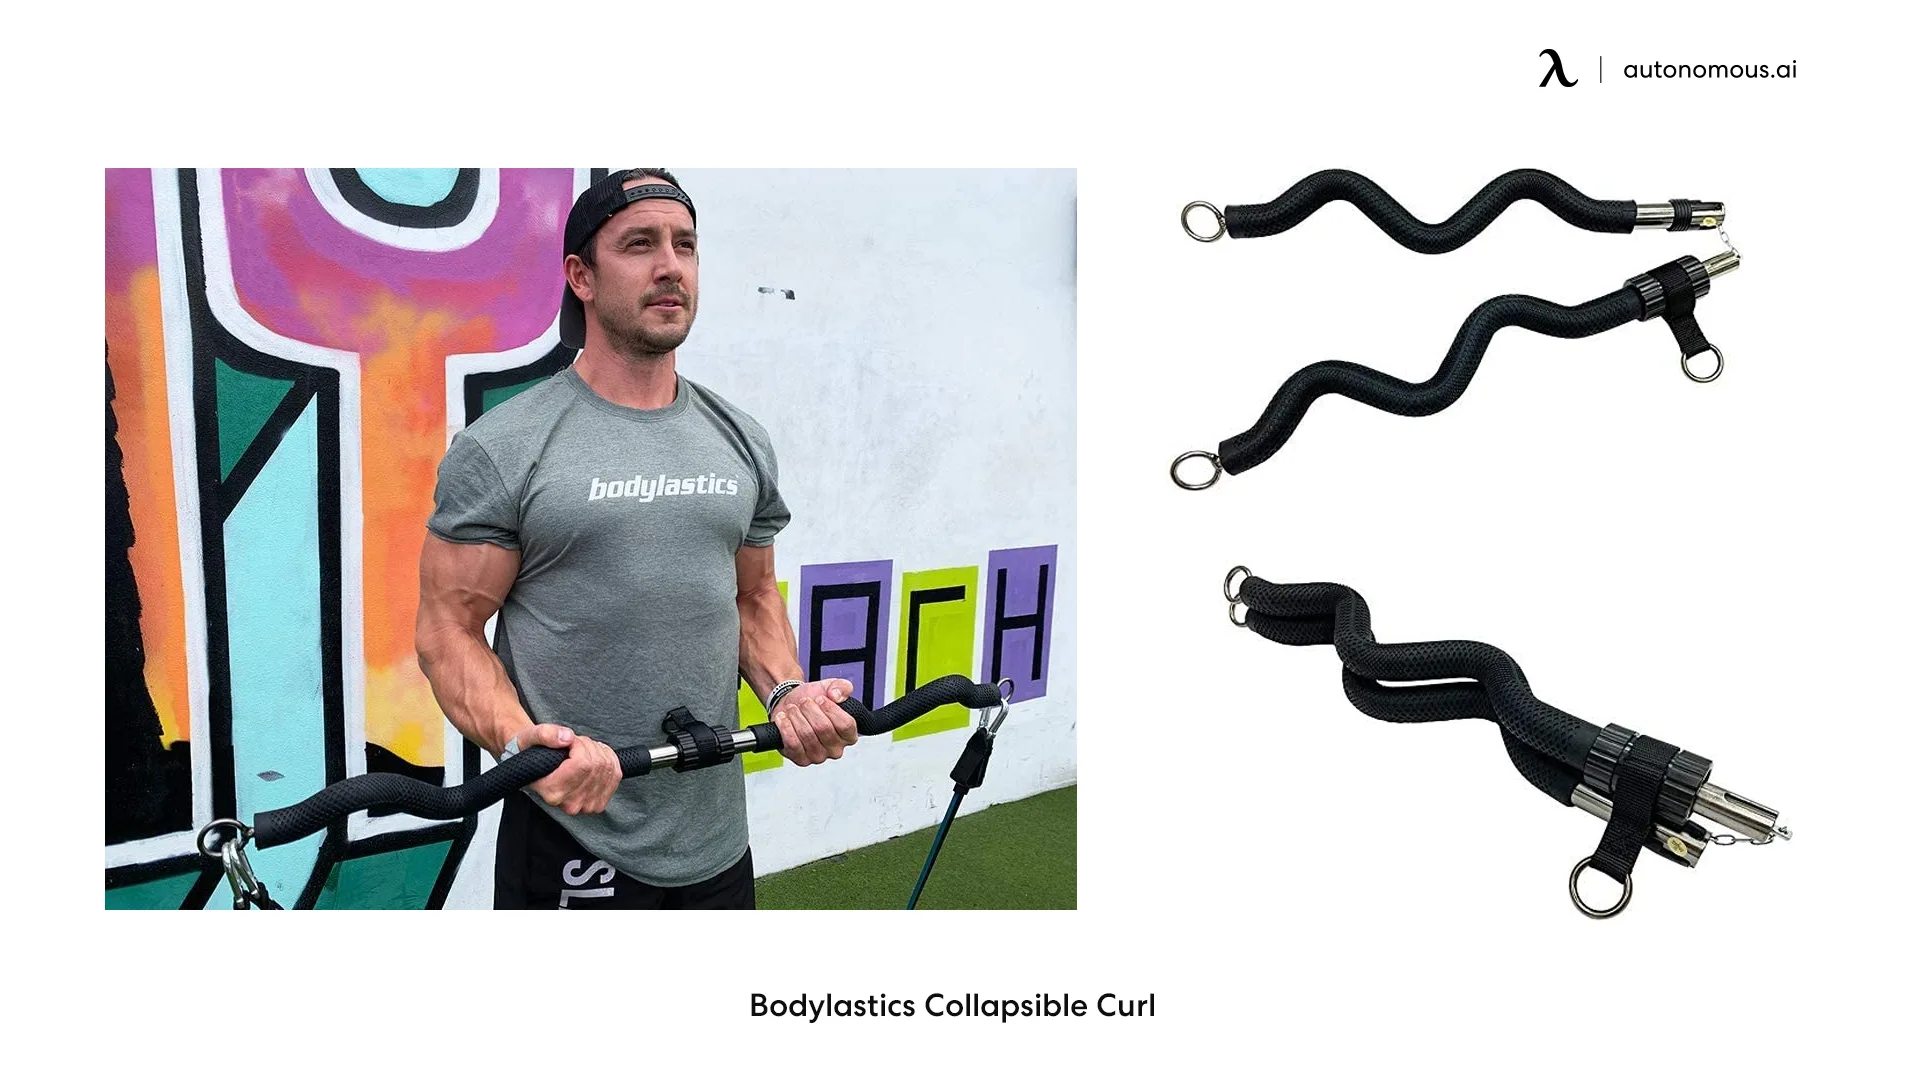 Bodylastics Collapsible Curl